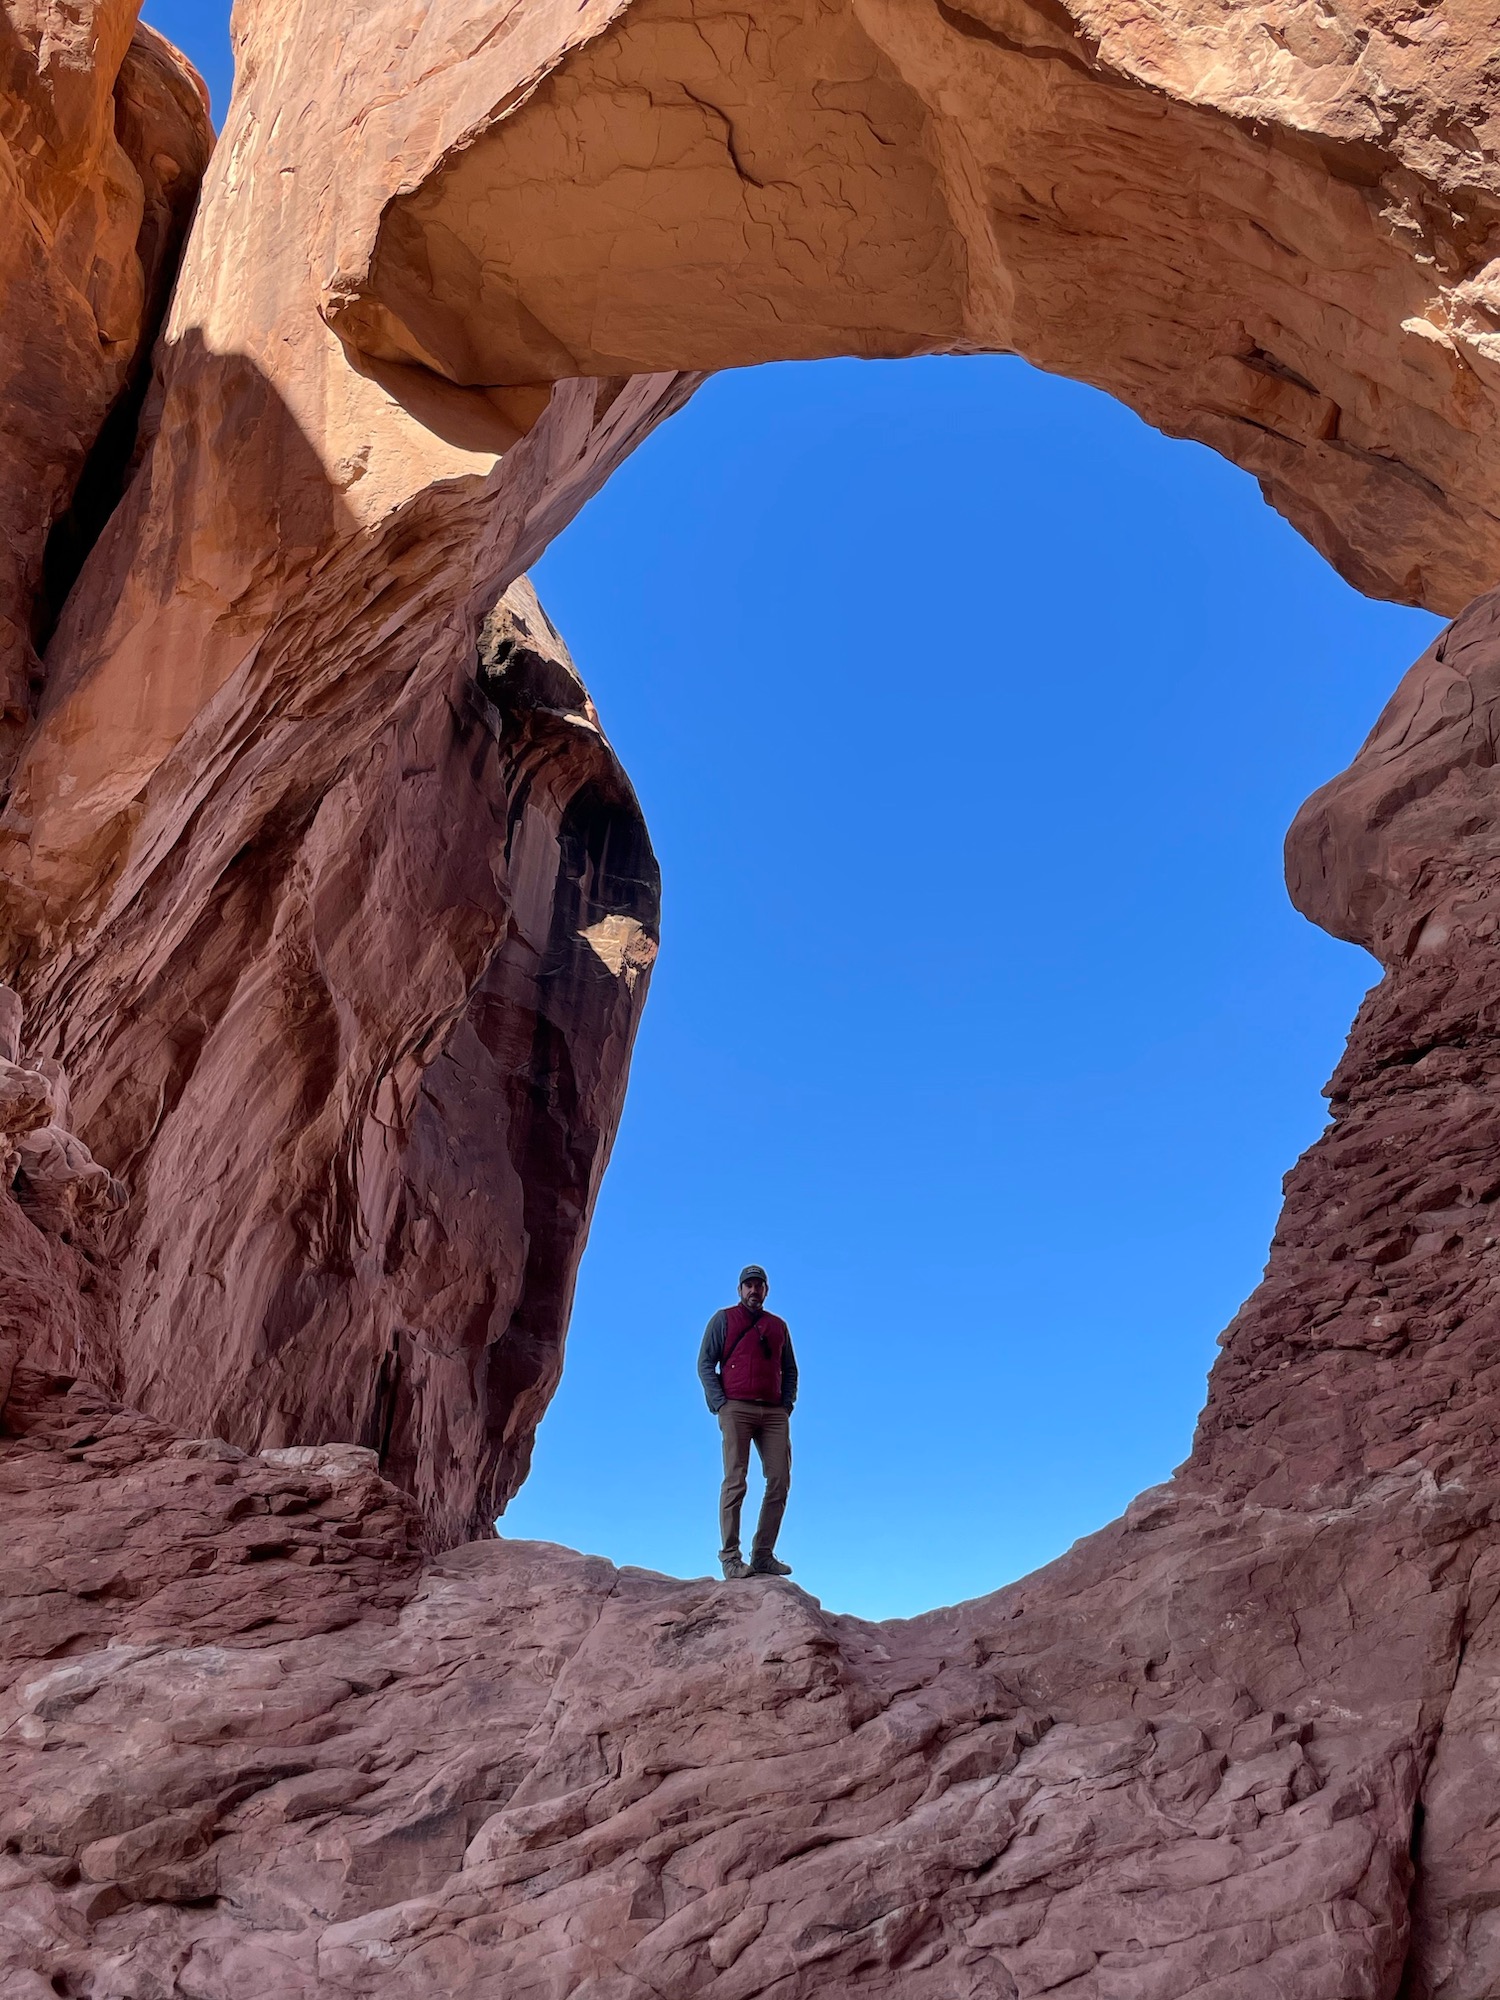 Standing inside the smaller opening of Double Arch.